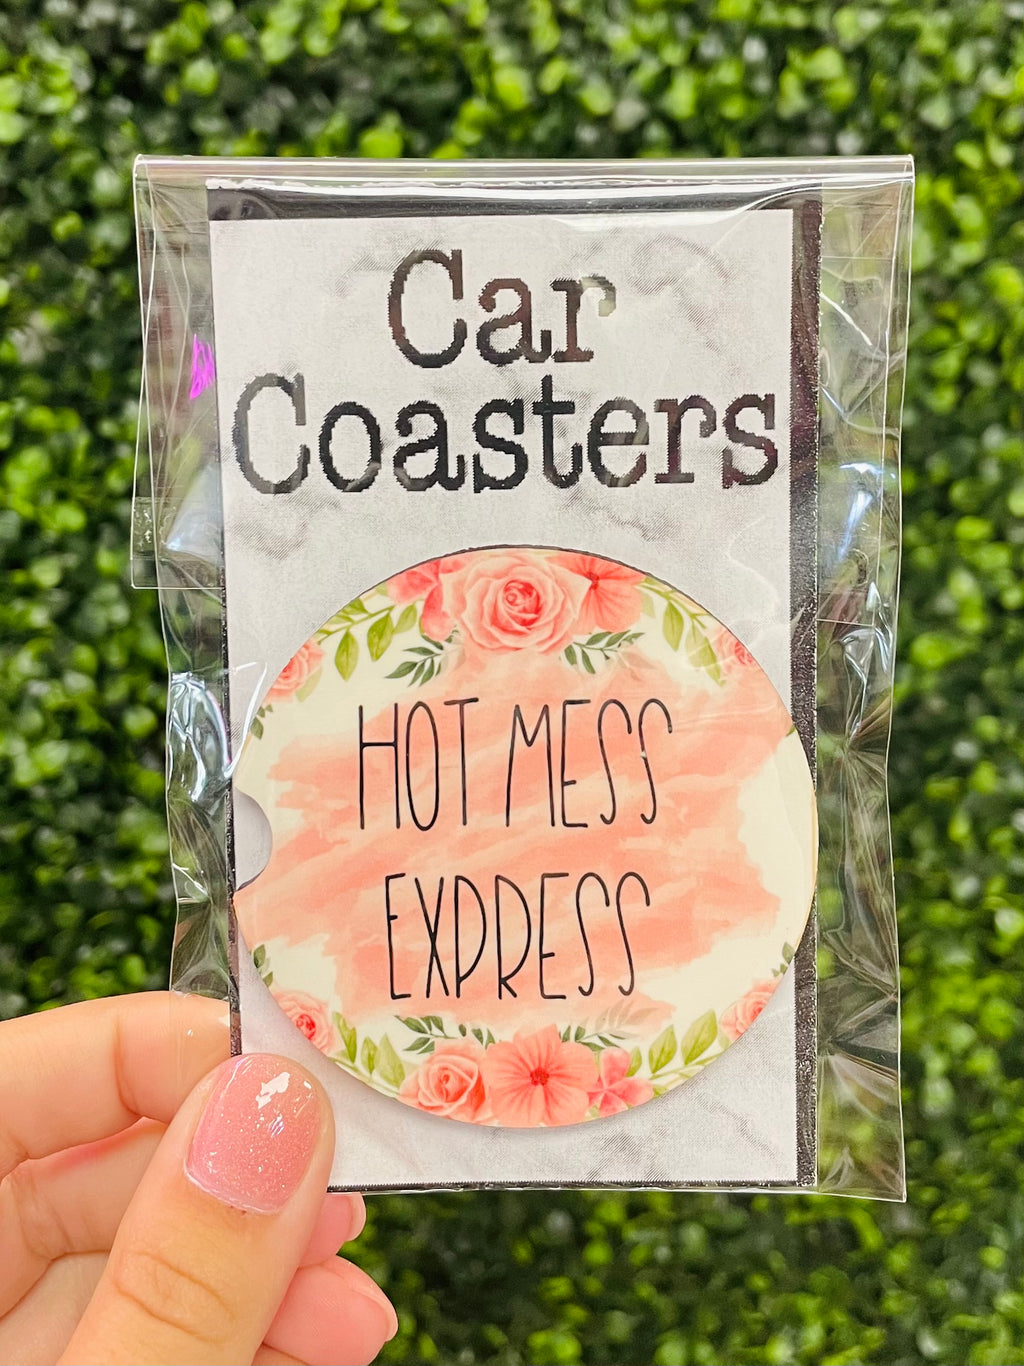 Don't let your car be a hot mess! Get the Hot Mess Express Coaster to keep your ride - and your life - looking fresh. This coaster is pink and floral, making sure you get an extra burst of personality every time you drive. It's the perfect gift for the car lover in your life - and their interior!